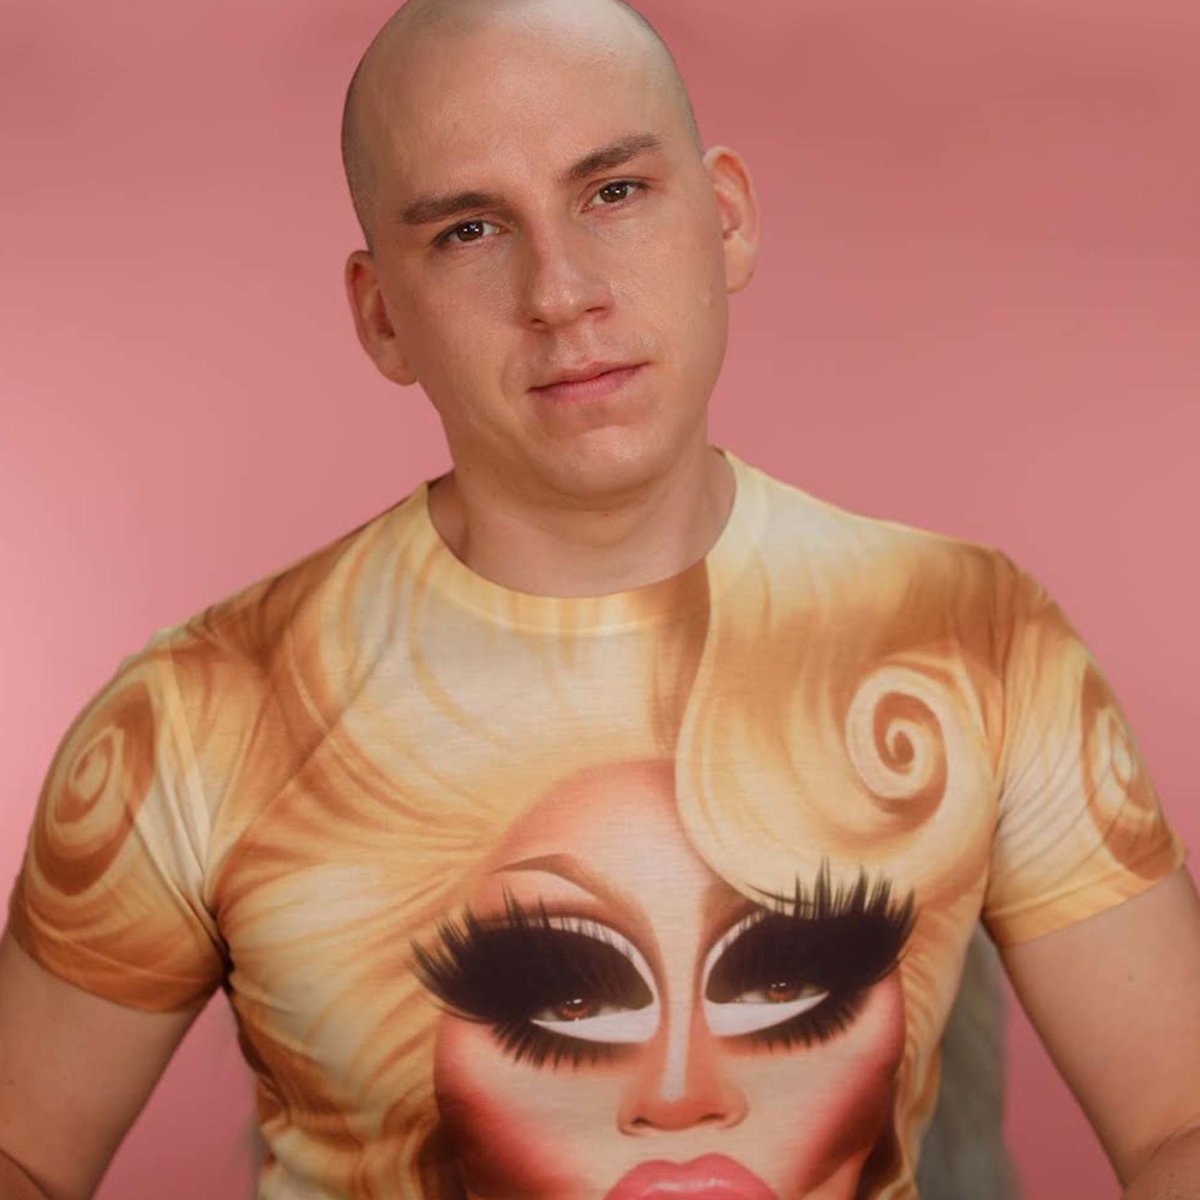 TRIXIE MATTEL - "Curly Fantasy" All Over Print T-Shirt